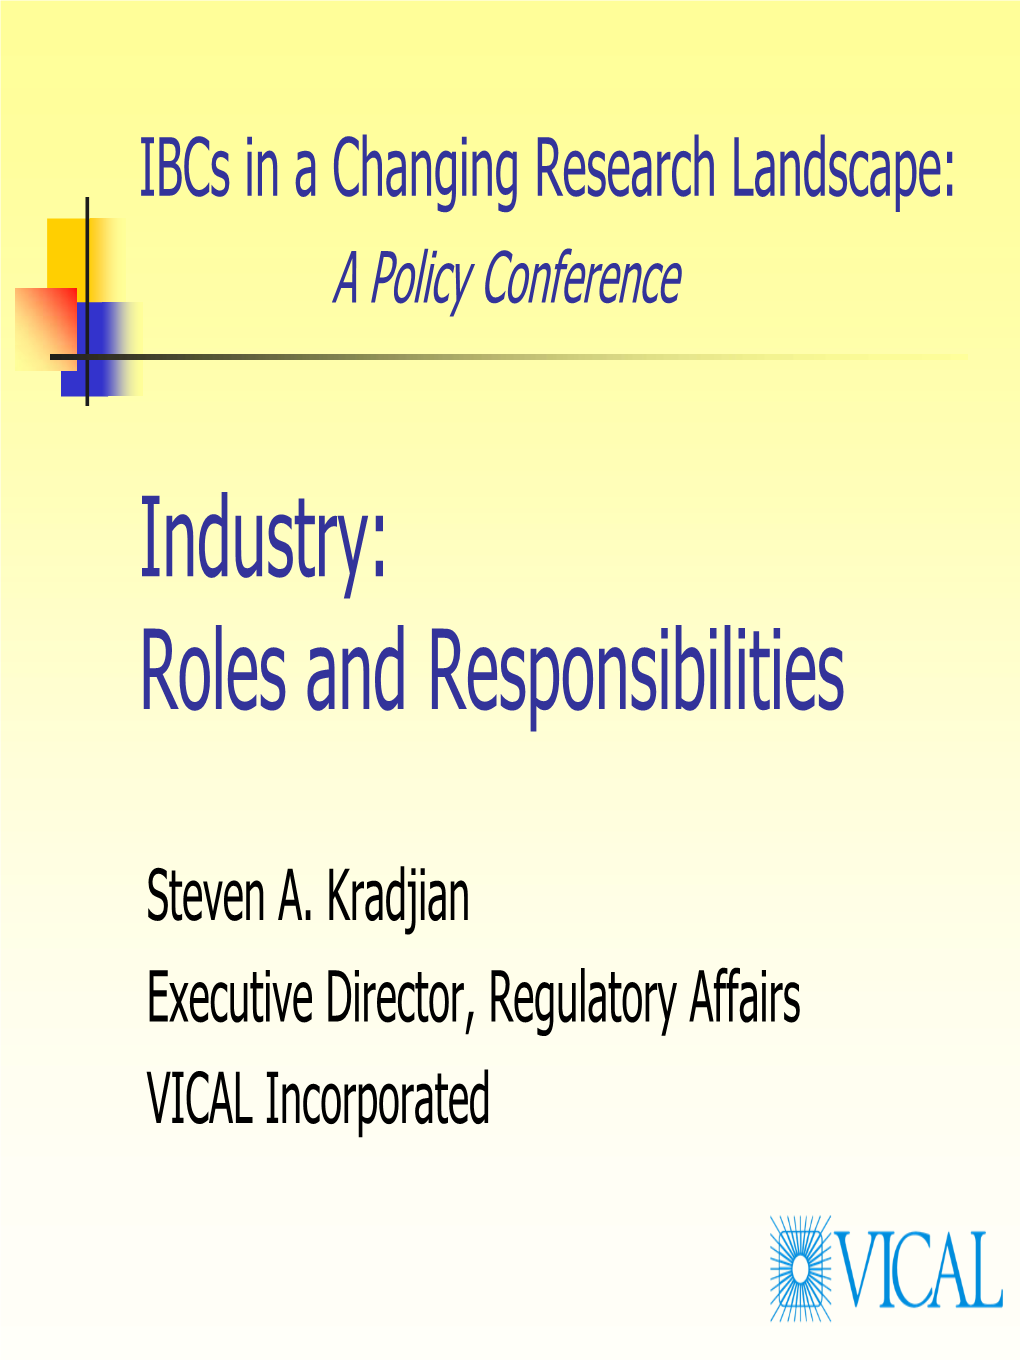 Industry Roles and Responsibilities